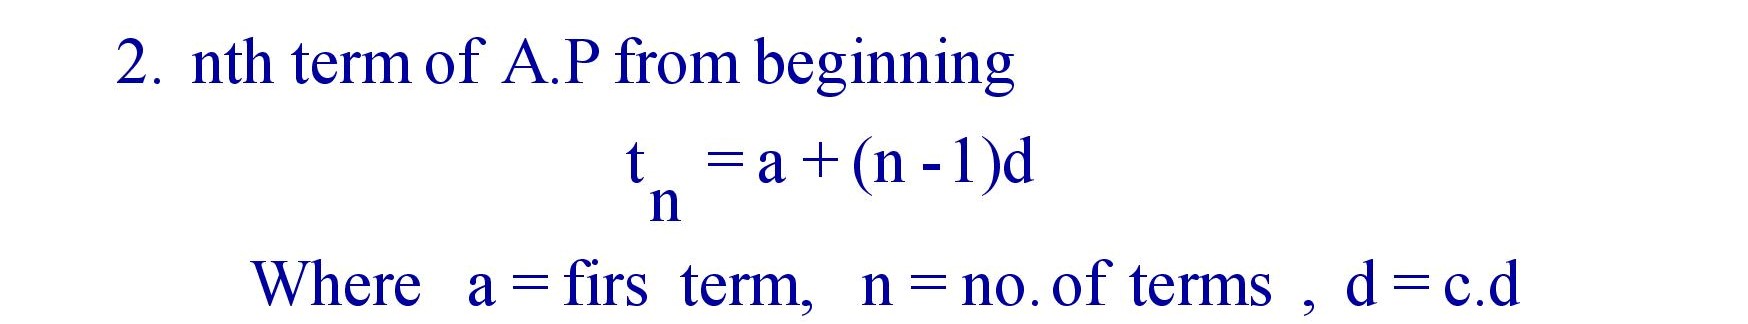 nth term of A.P from beginning